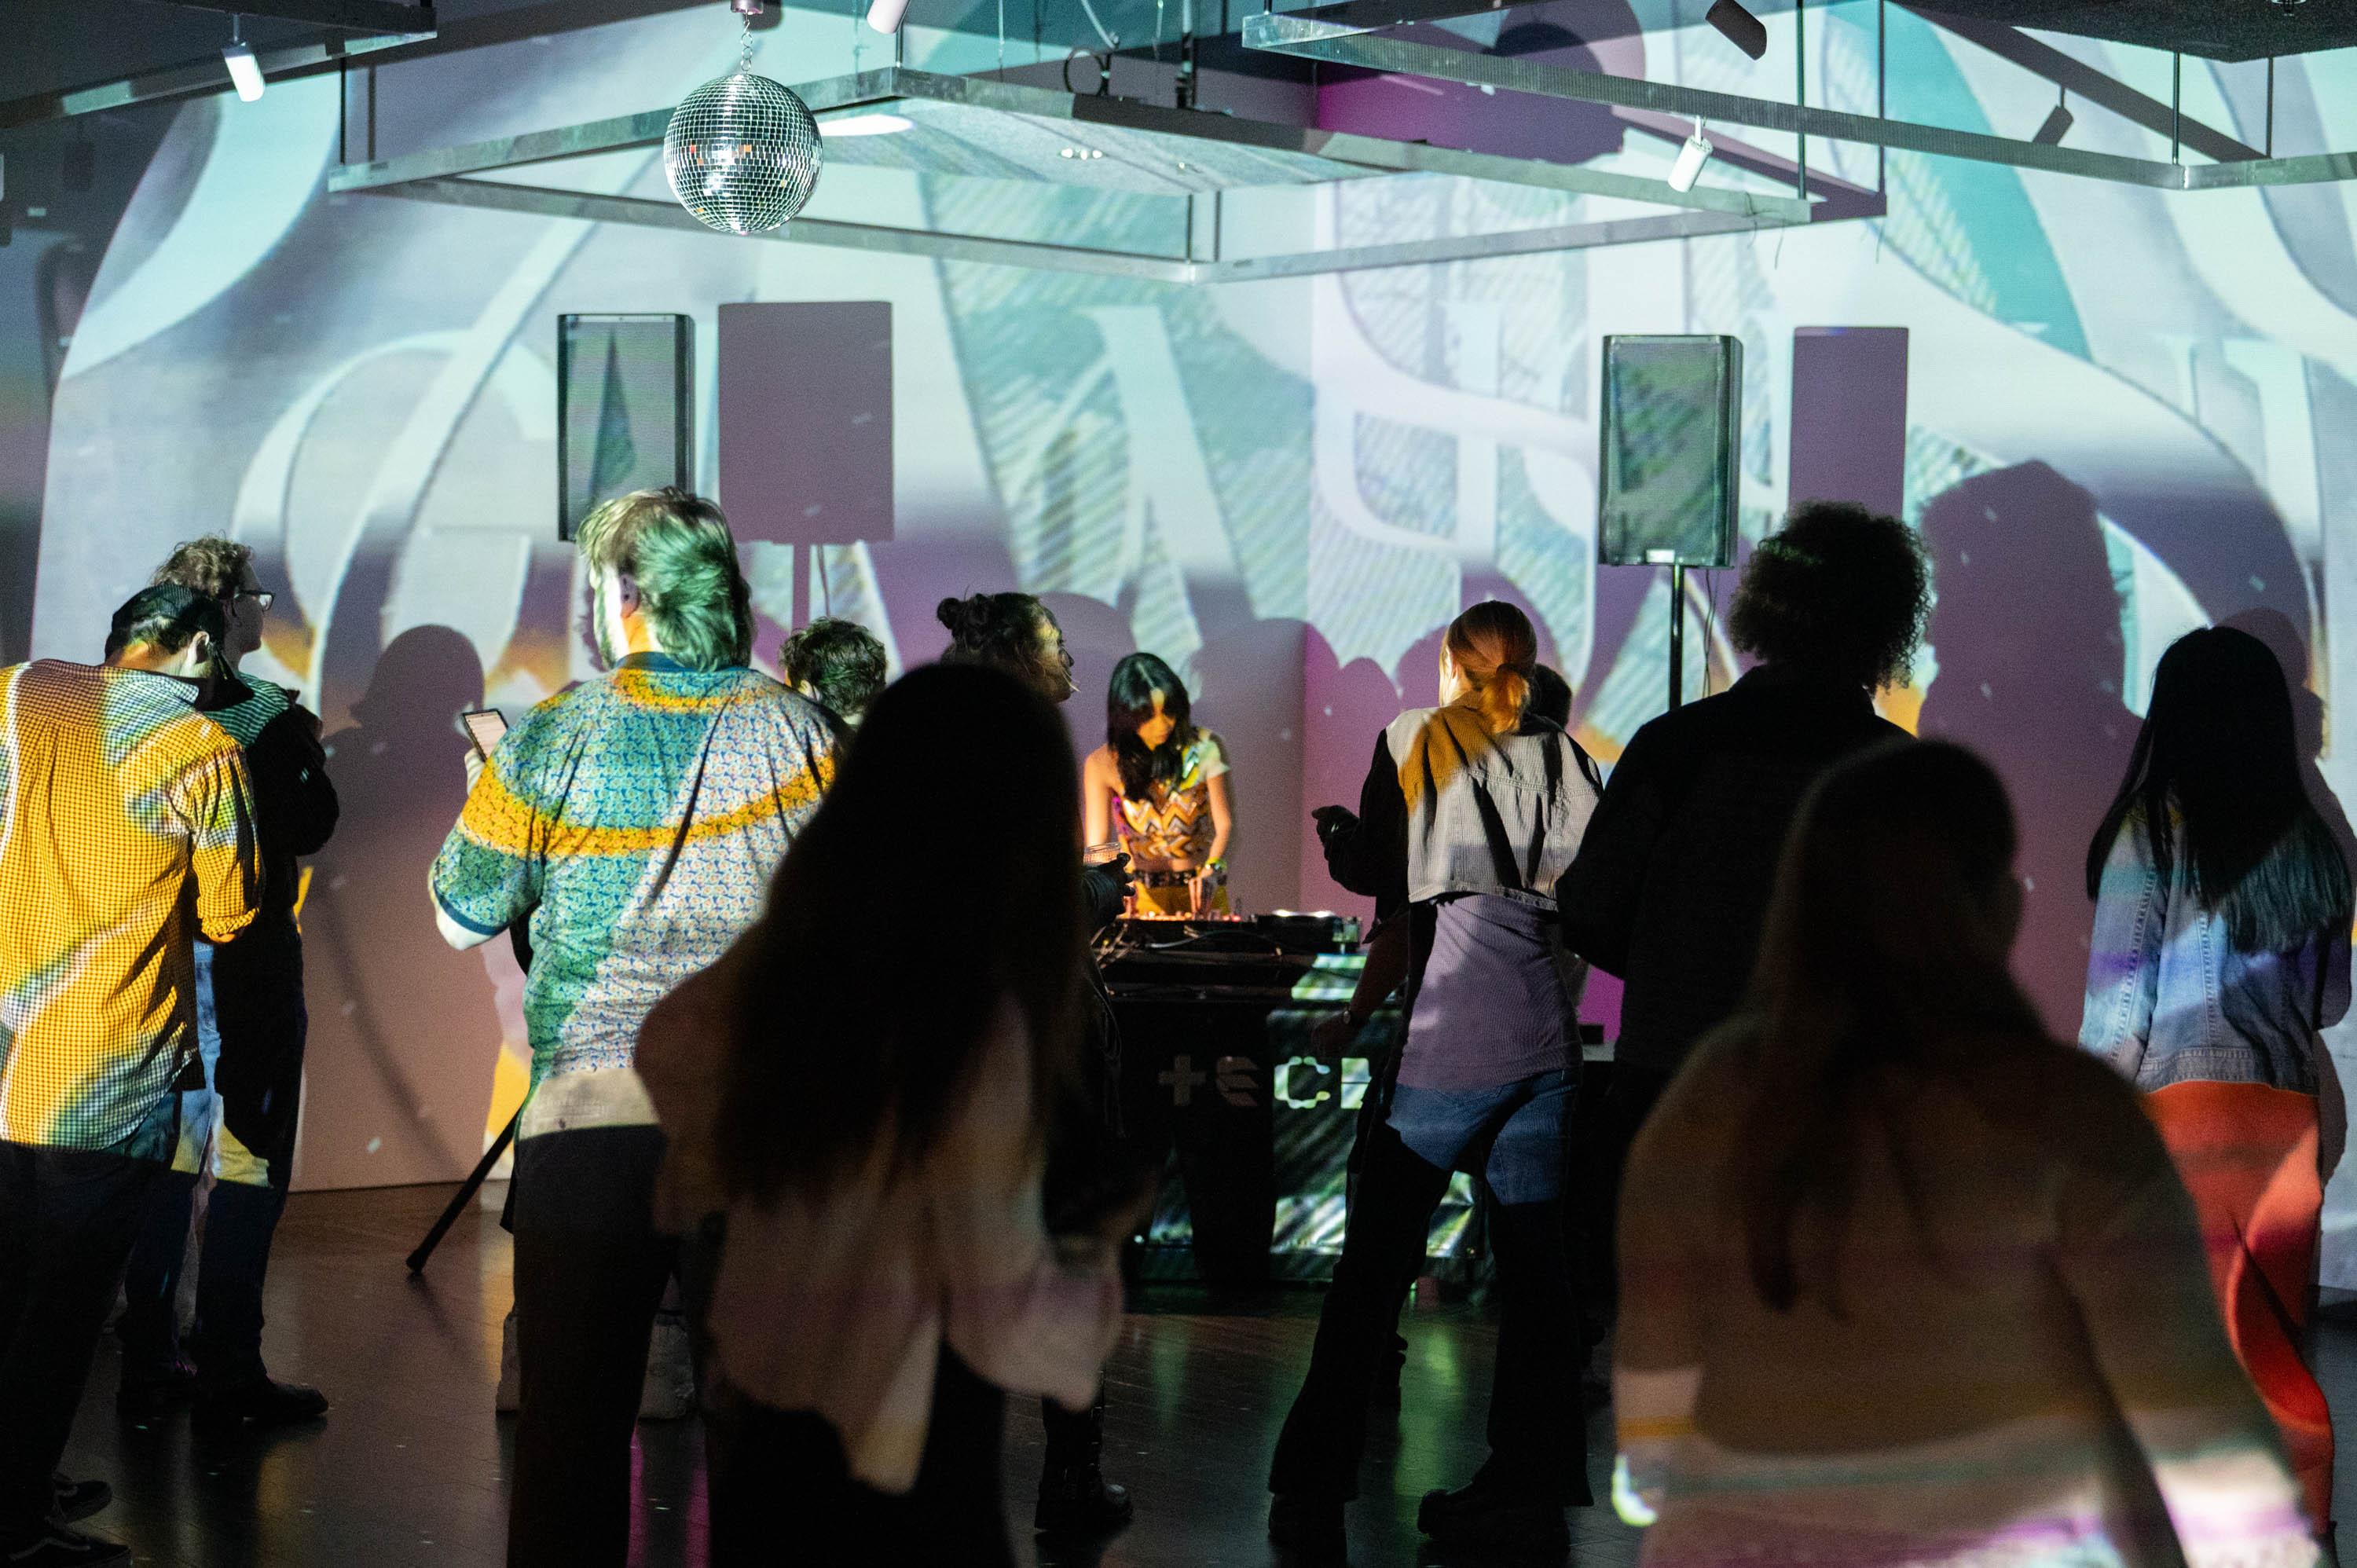 a crowd dances in front of a DJ who has art projected on the wall behind her